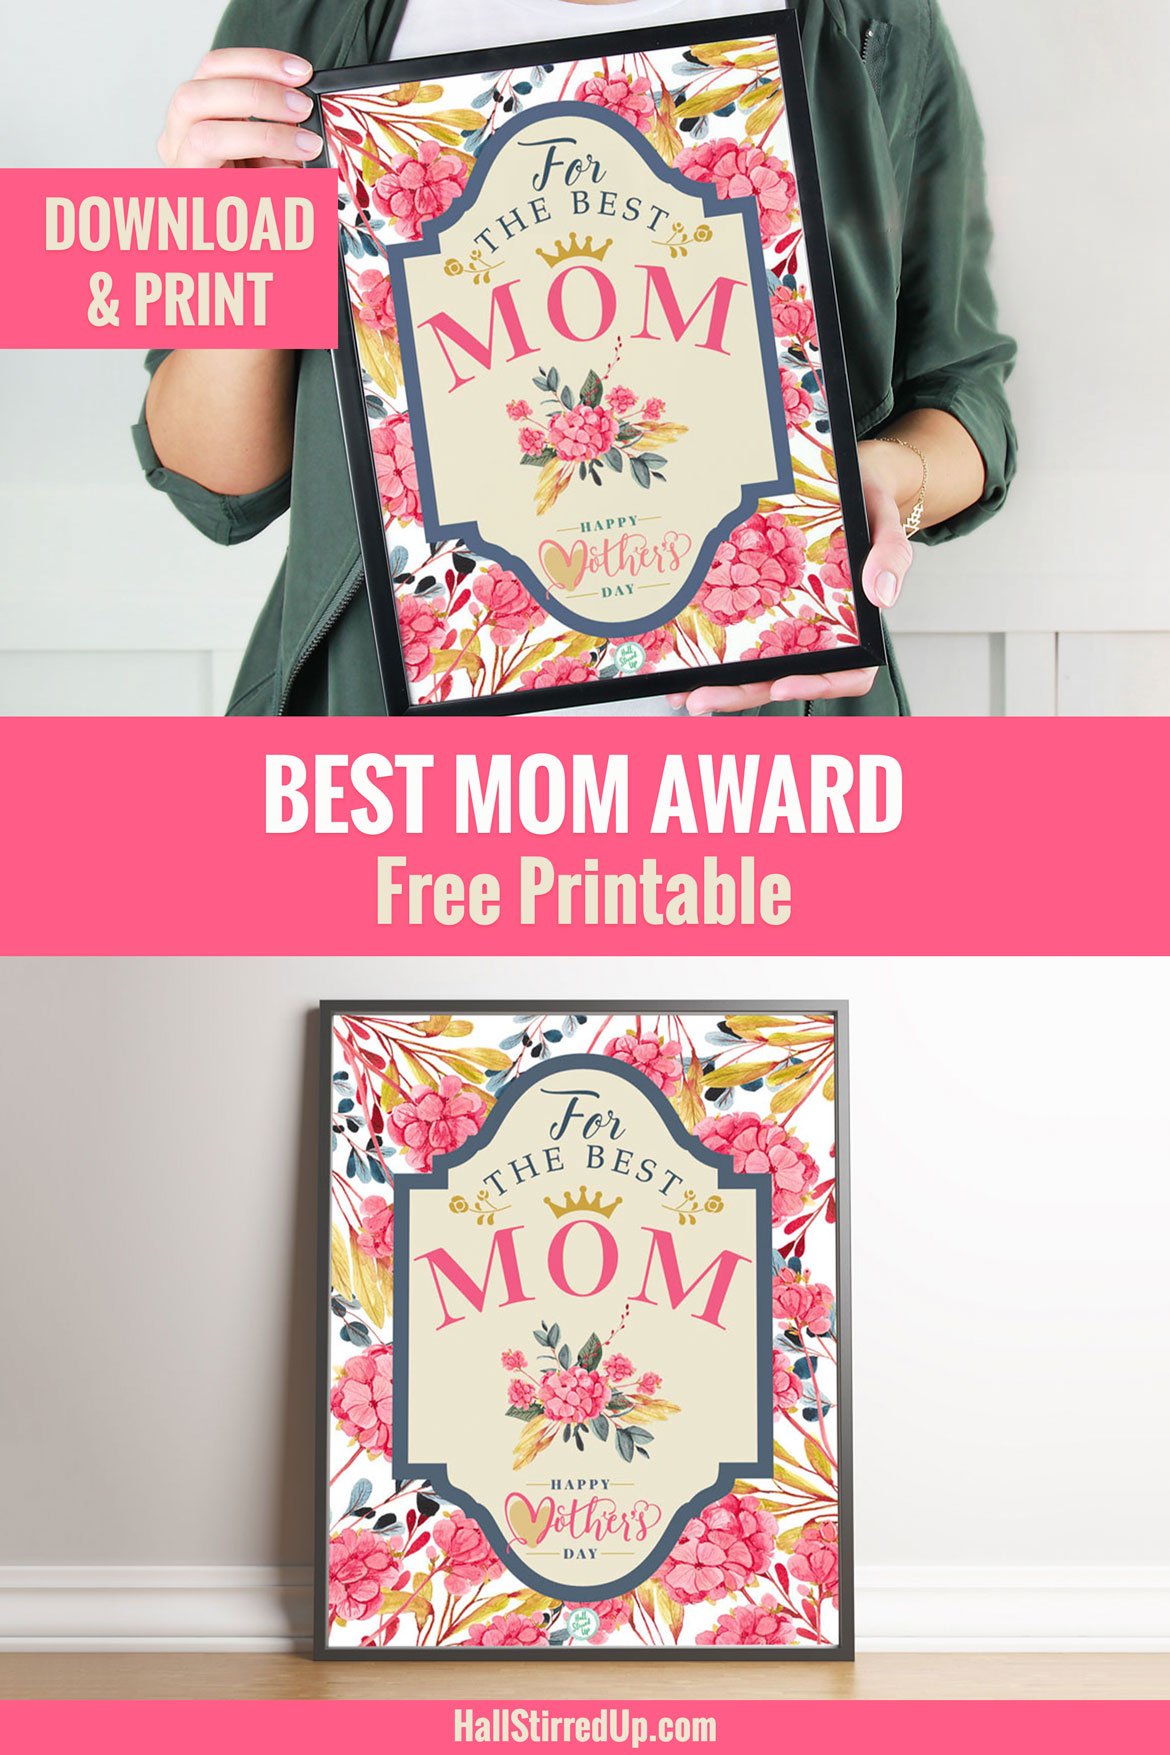 She's the best mom and deserves a pretty printable